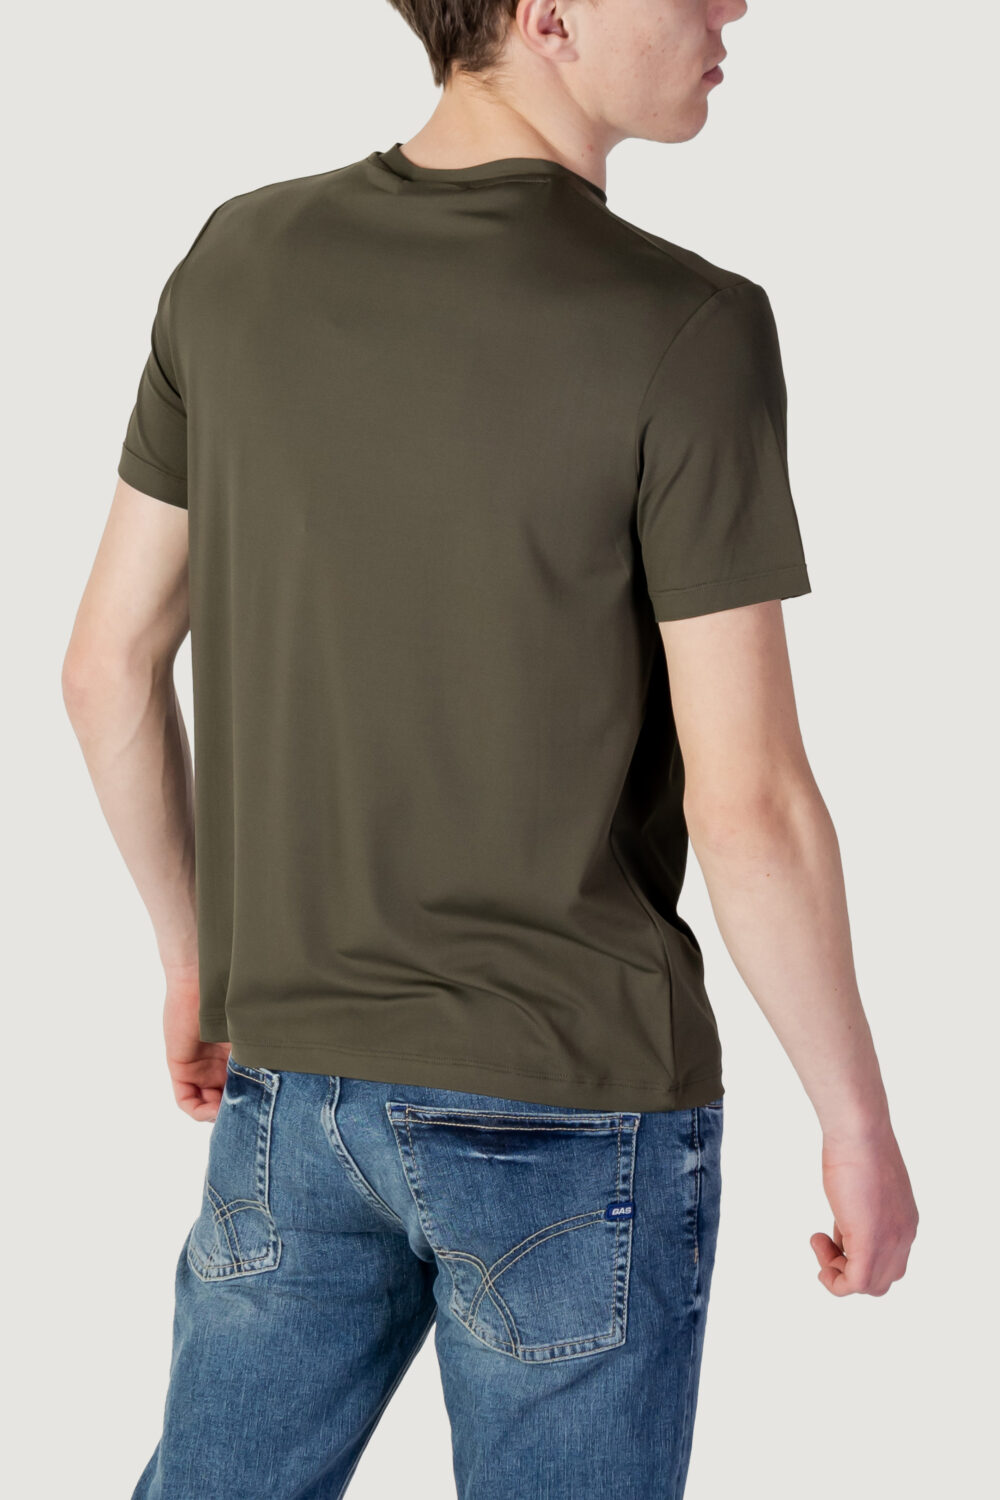 T-shirt Suns paolo lux Verde Oliva - Foto 4